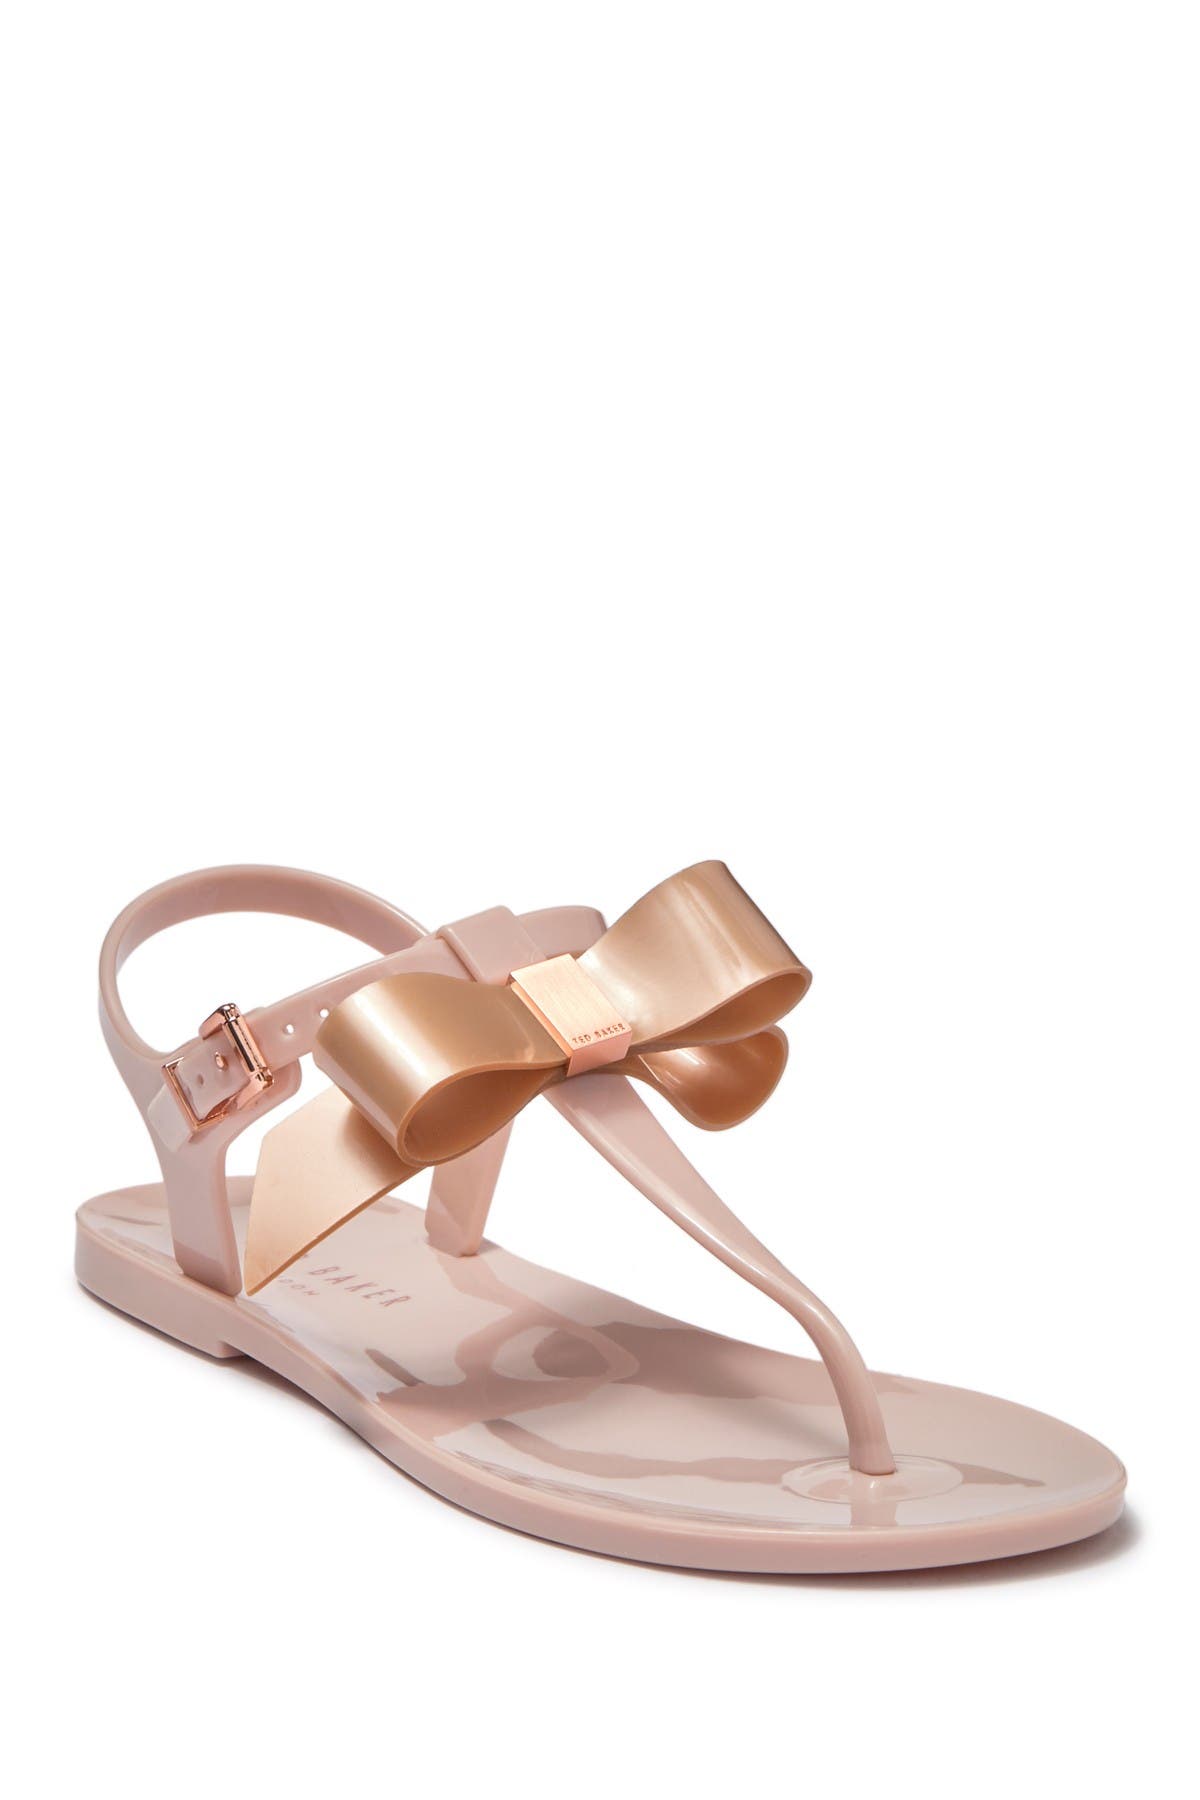 ted baker jelly sandals